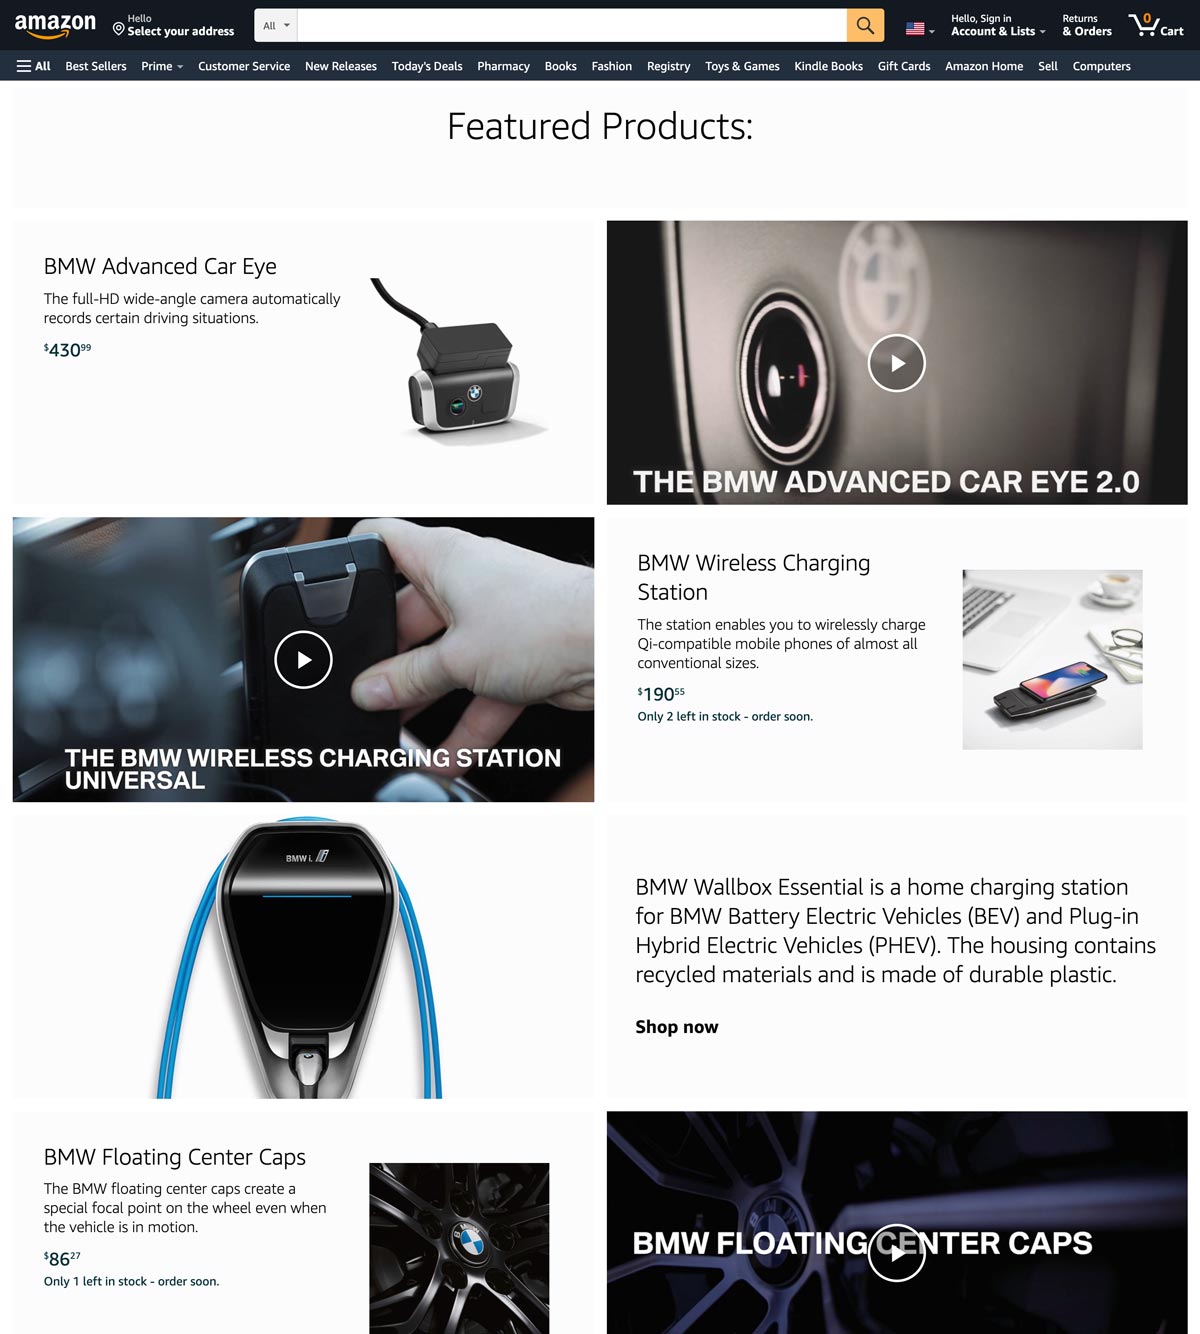 Screenshot of the BMW Amazon Seller Central featured products page on Amazon.com